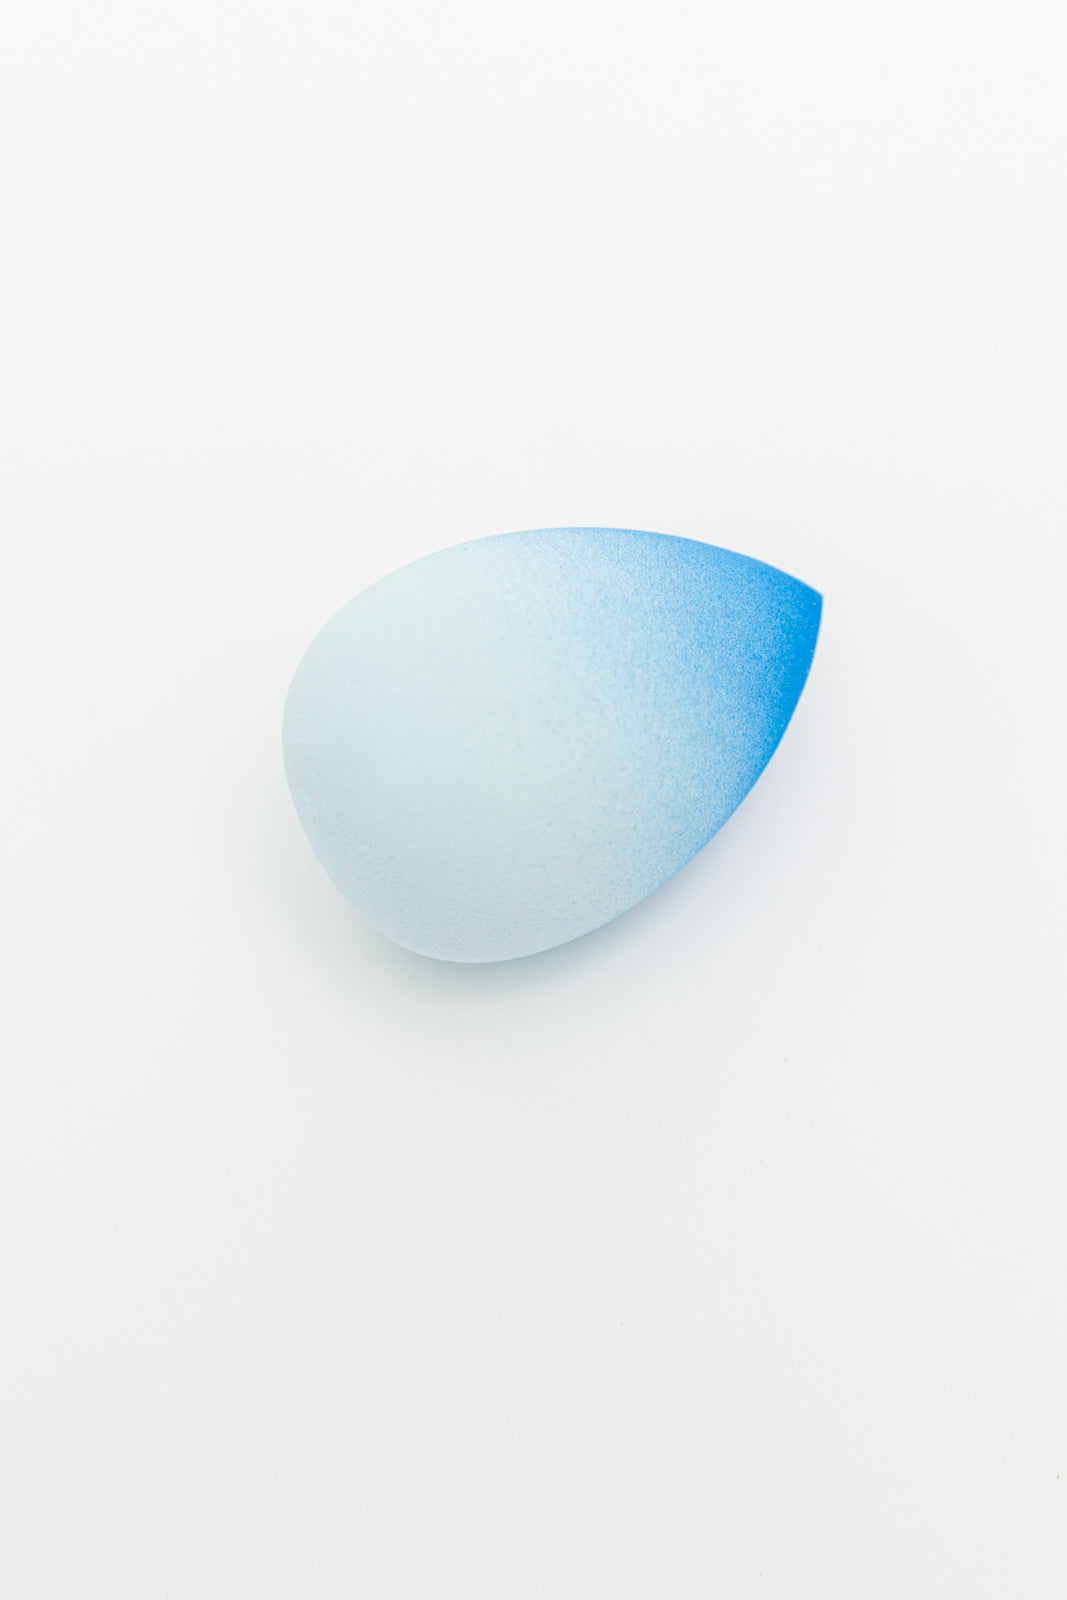 Brand Collab Cool Ombre Makeup Sponge in Four Colors